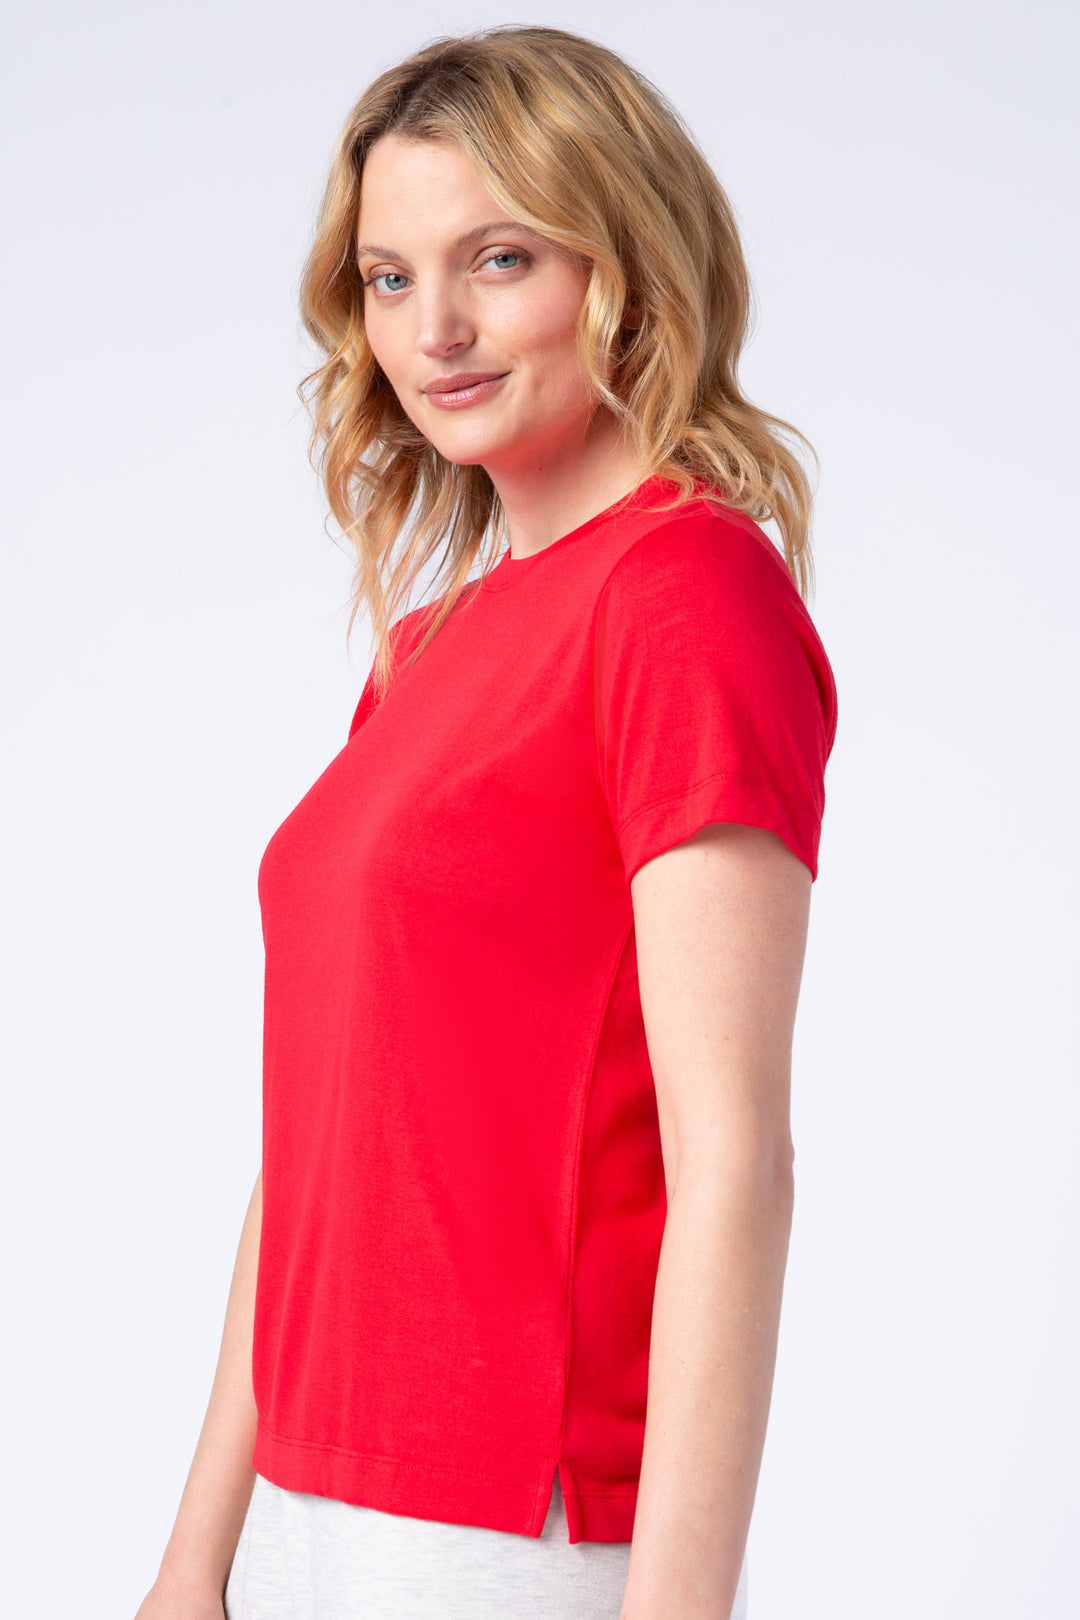 Women's red cotton-blend t-shirt in slub jersey with relaxed fit.